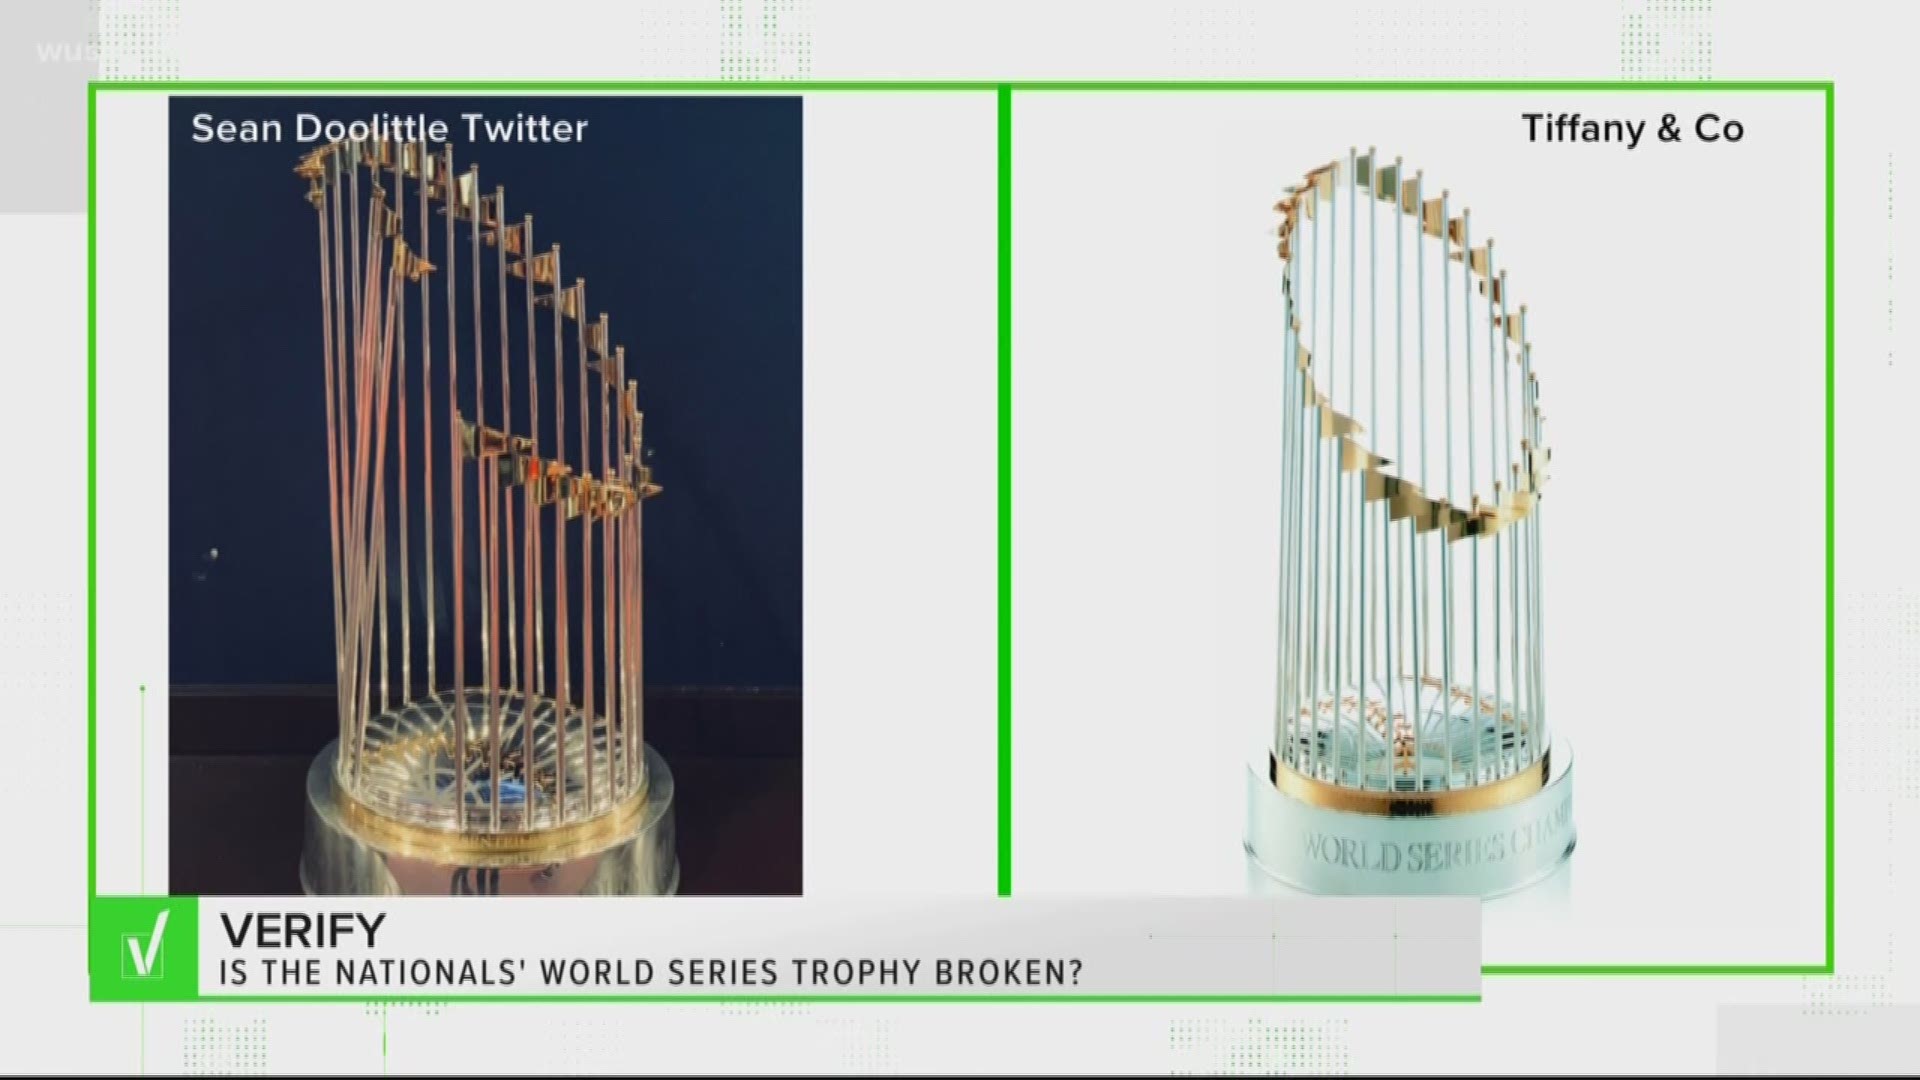 Sean Doolittle and Erica Scherzer tweeted photos of a very broken Commissioner's Trophy following Game 7 celebrations.